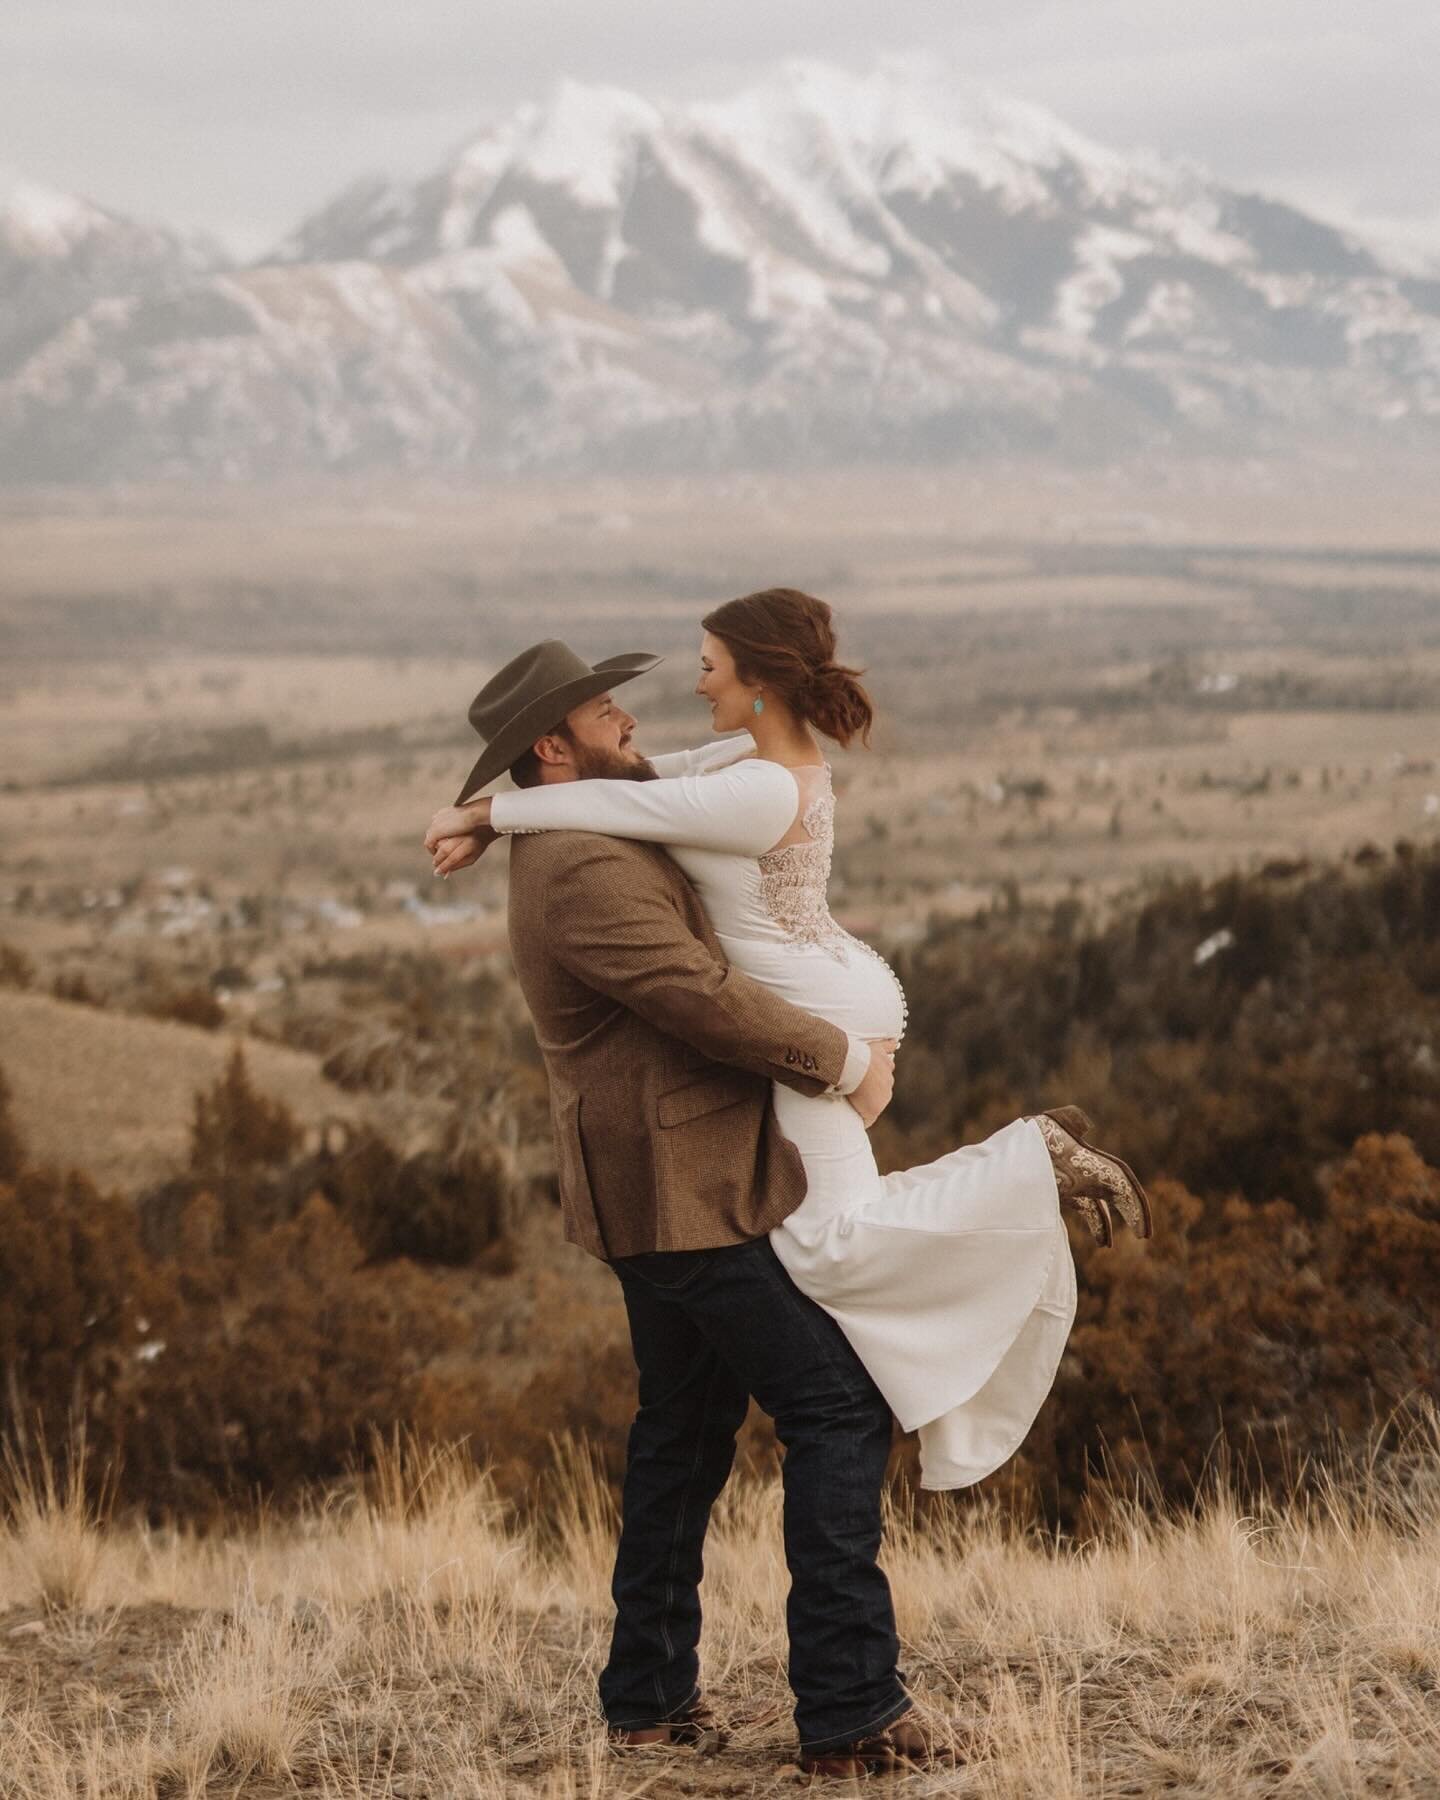 What an absolute beautiful day it was with Brice and Kenna. They decided a traditional wedding wasn&rsquo;t them so they drove over 30 hours to Montana to exchange vows and commit to each other in such a beautiful way. Weddings/Elopements doesn&rsquo